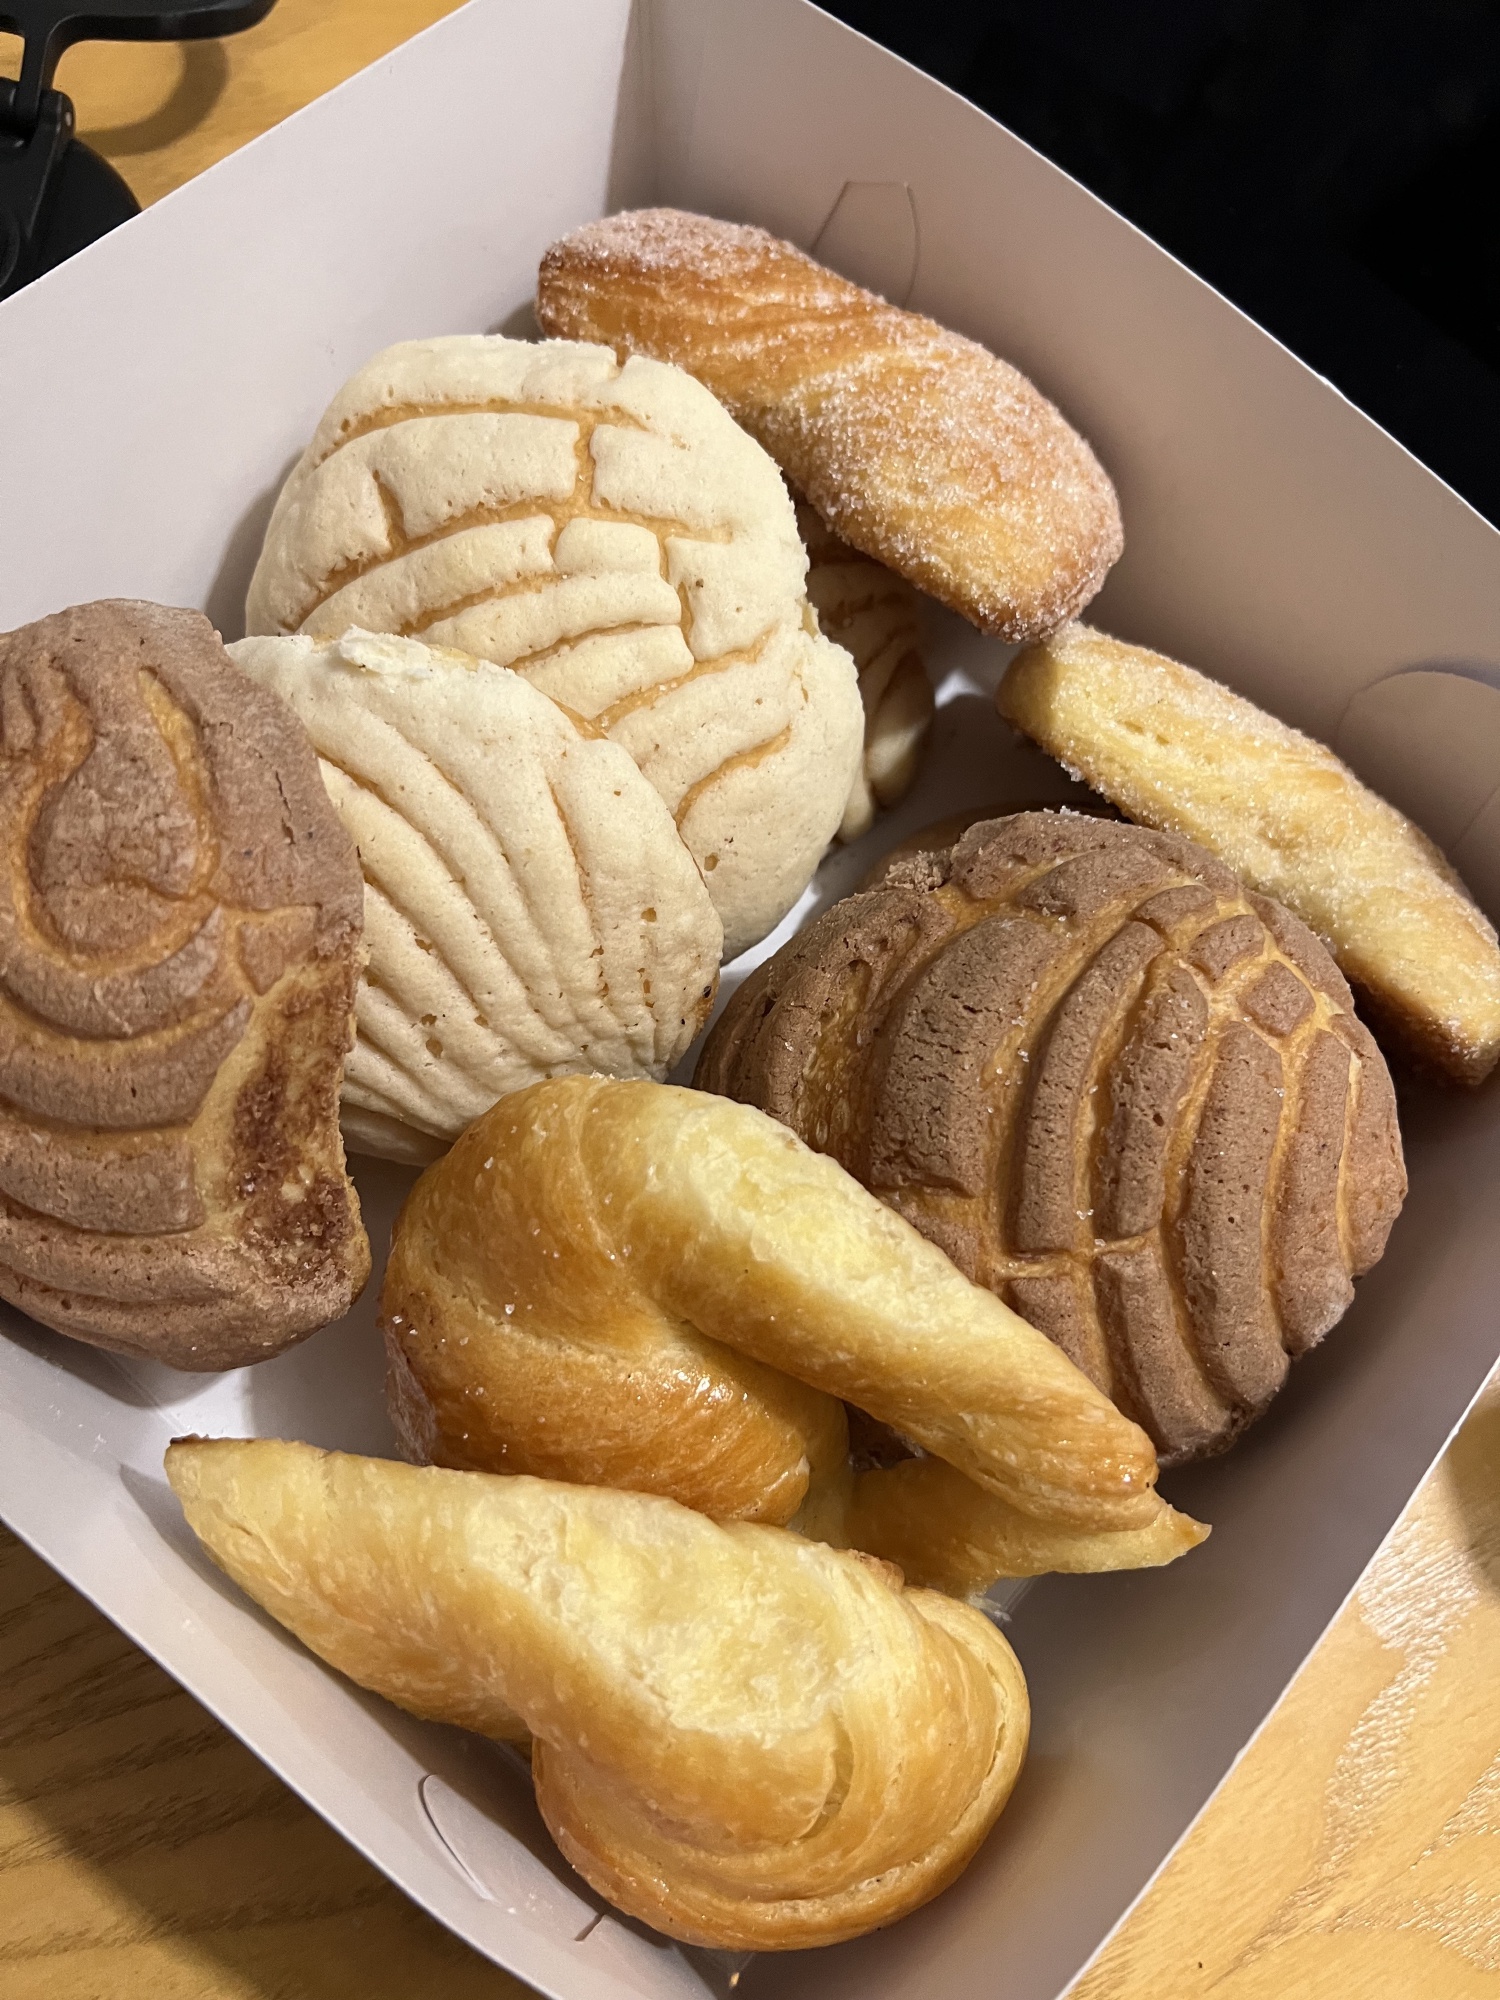 The baked goods here are so delicious! My favorite are the conchas!